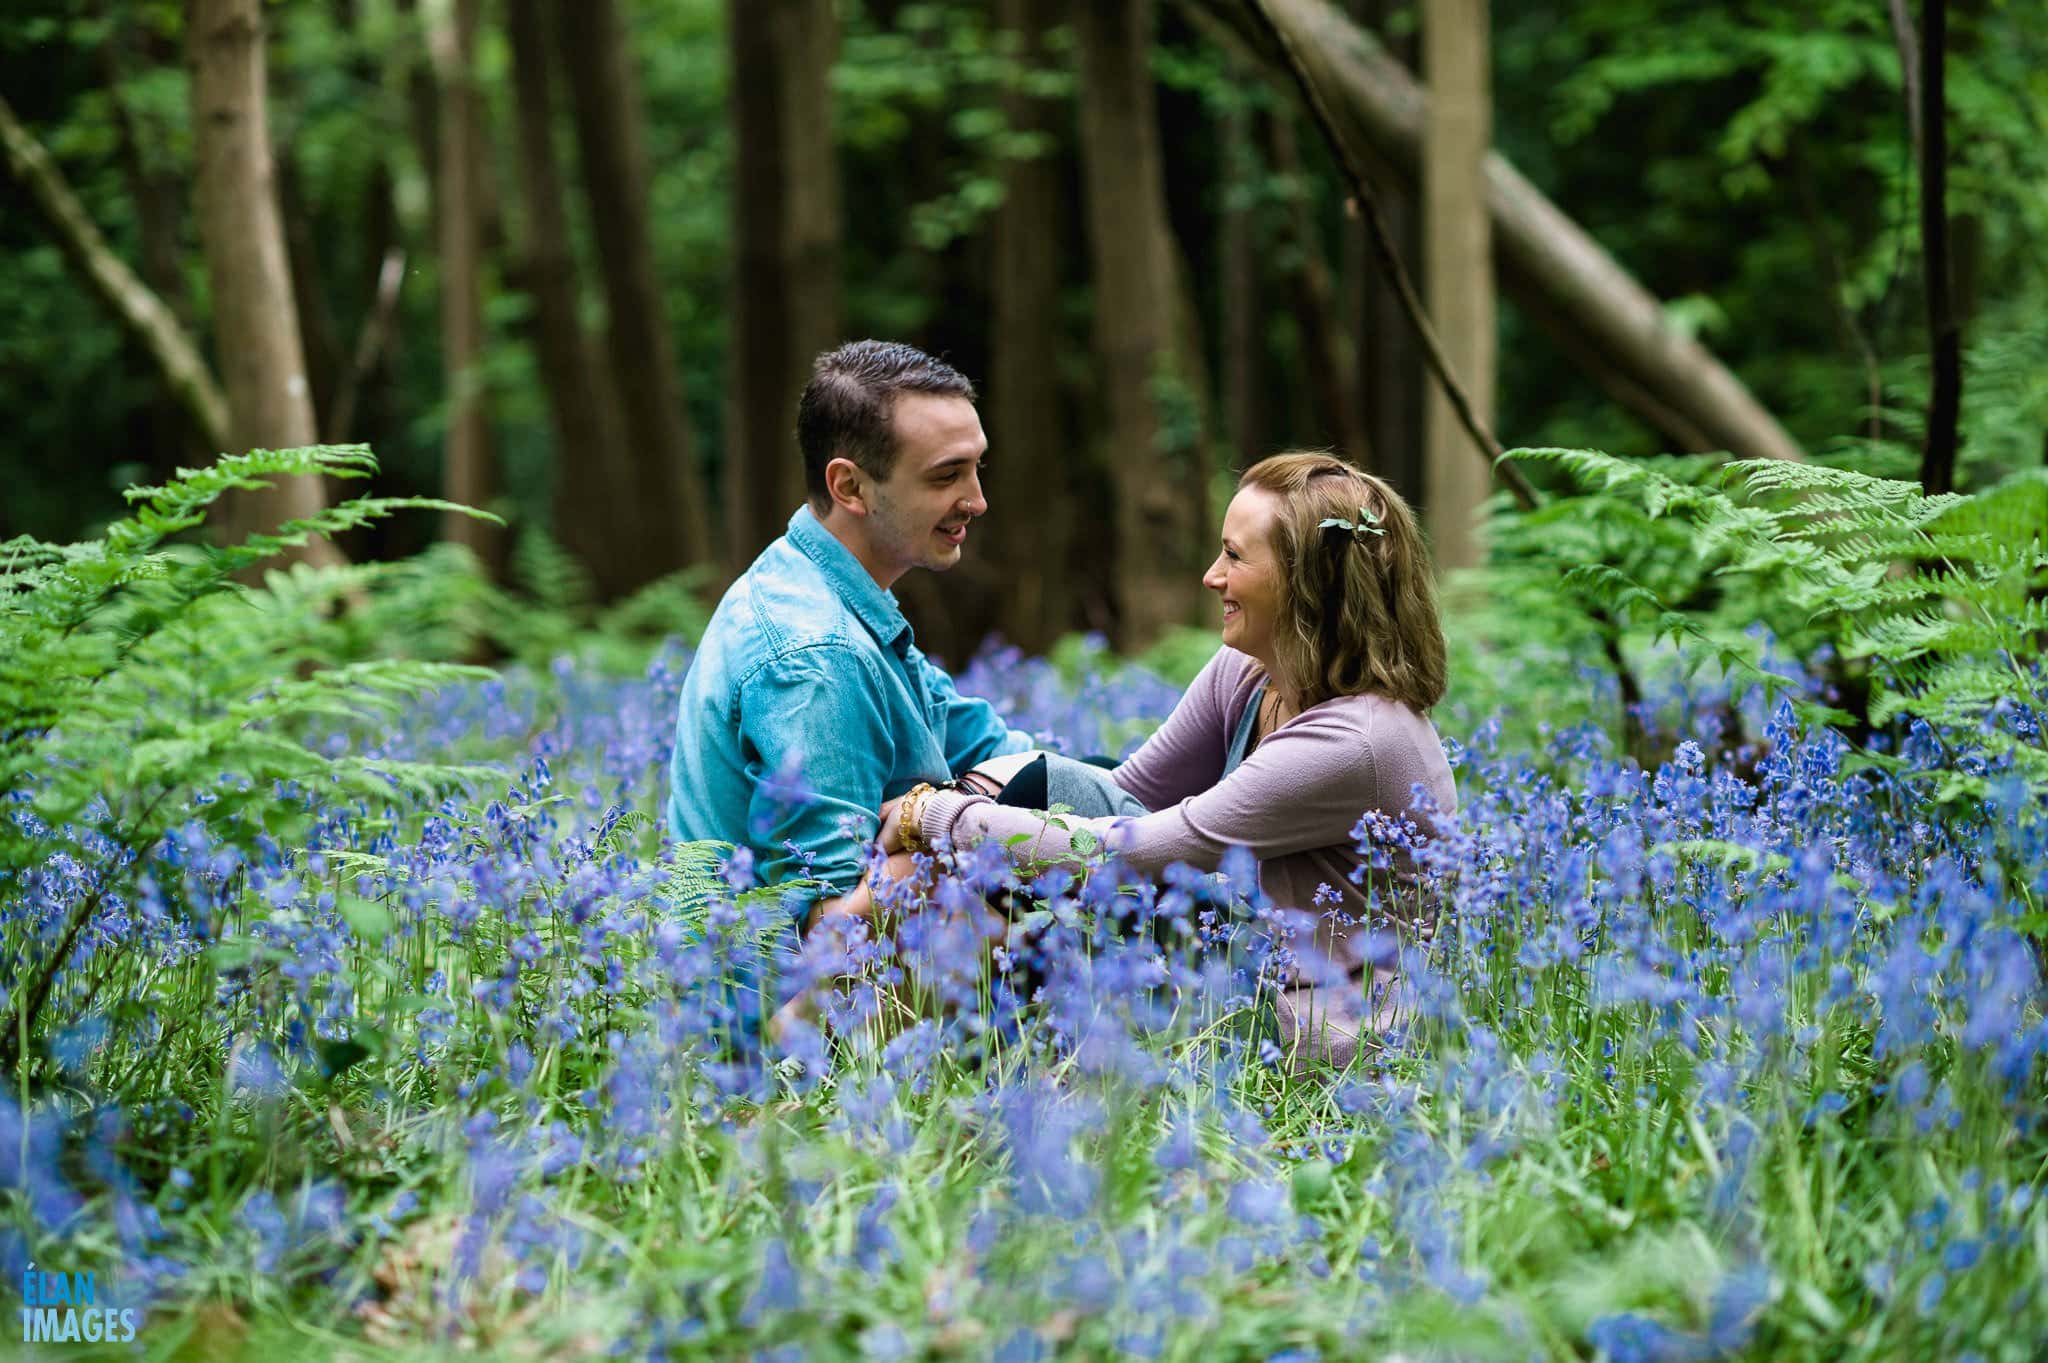 Engagement Photo Shoot in the Bluebell Woods near Bristol 13